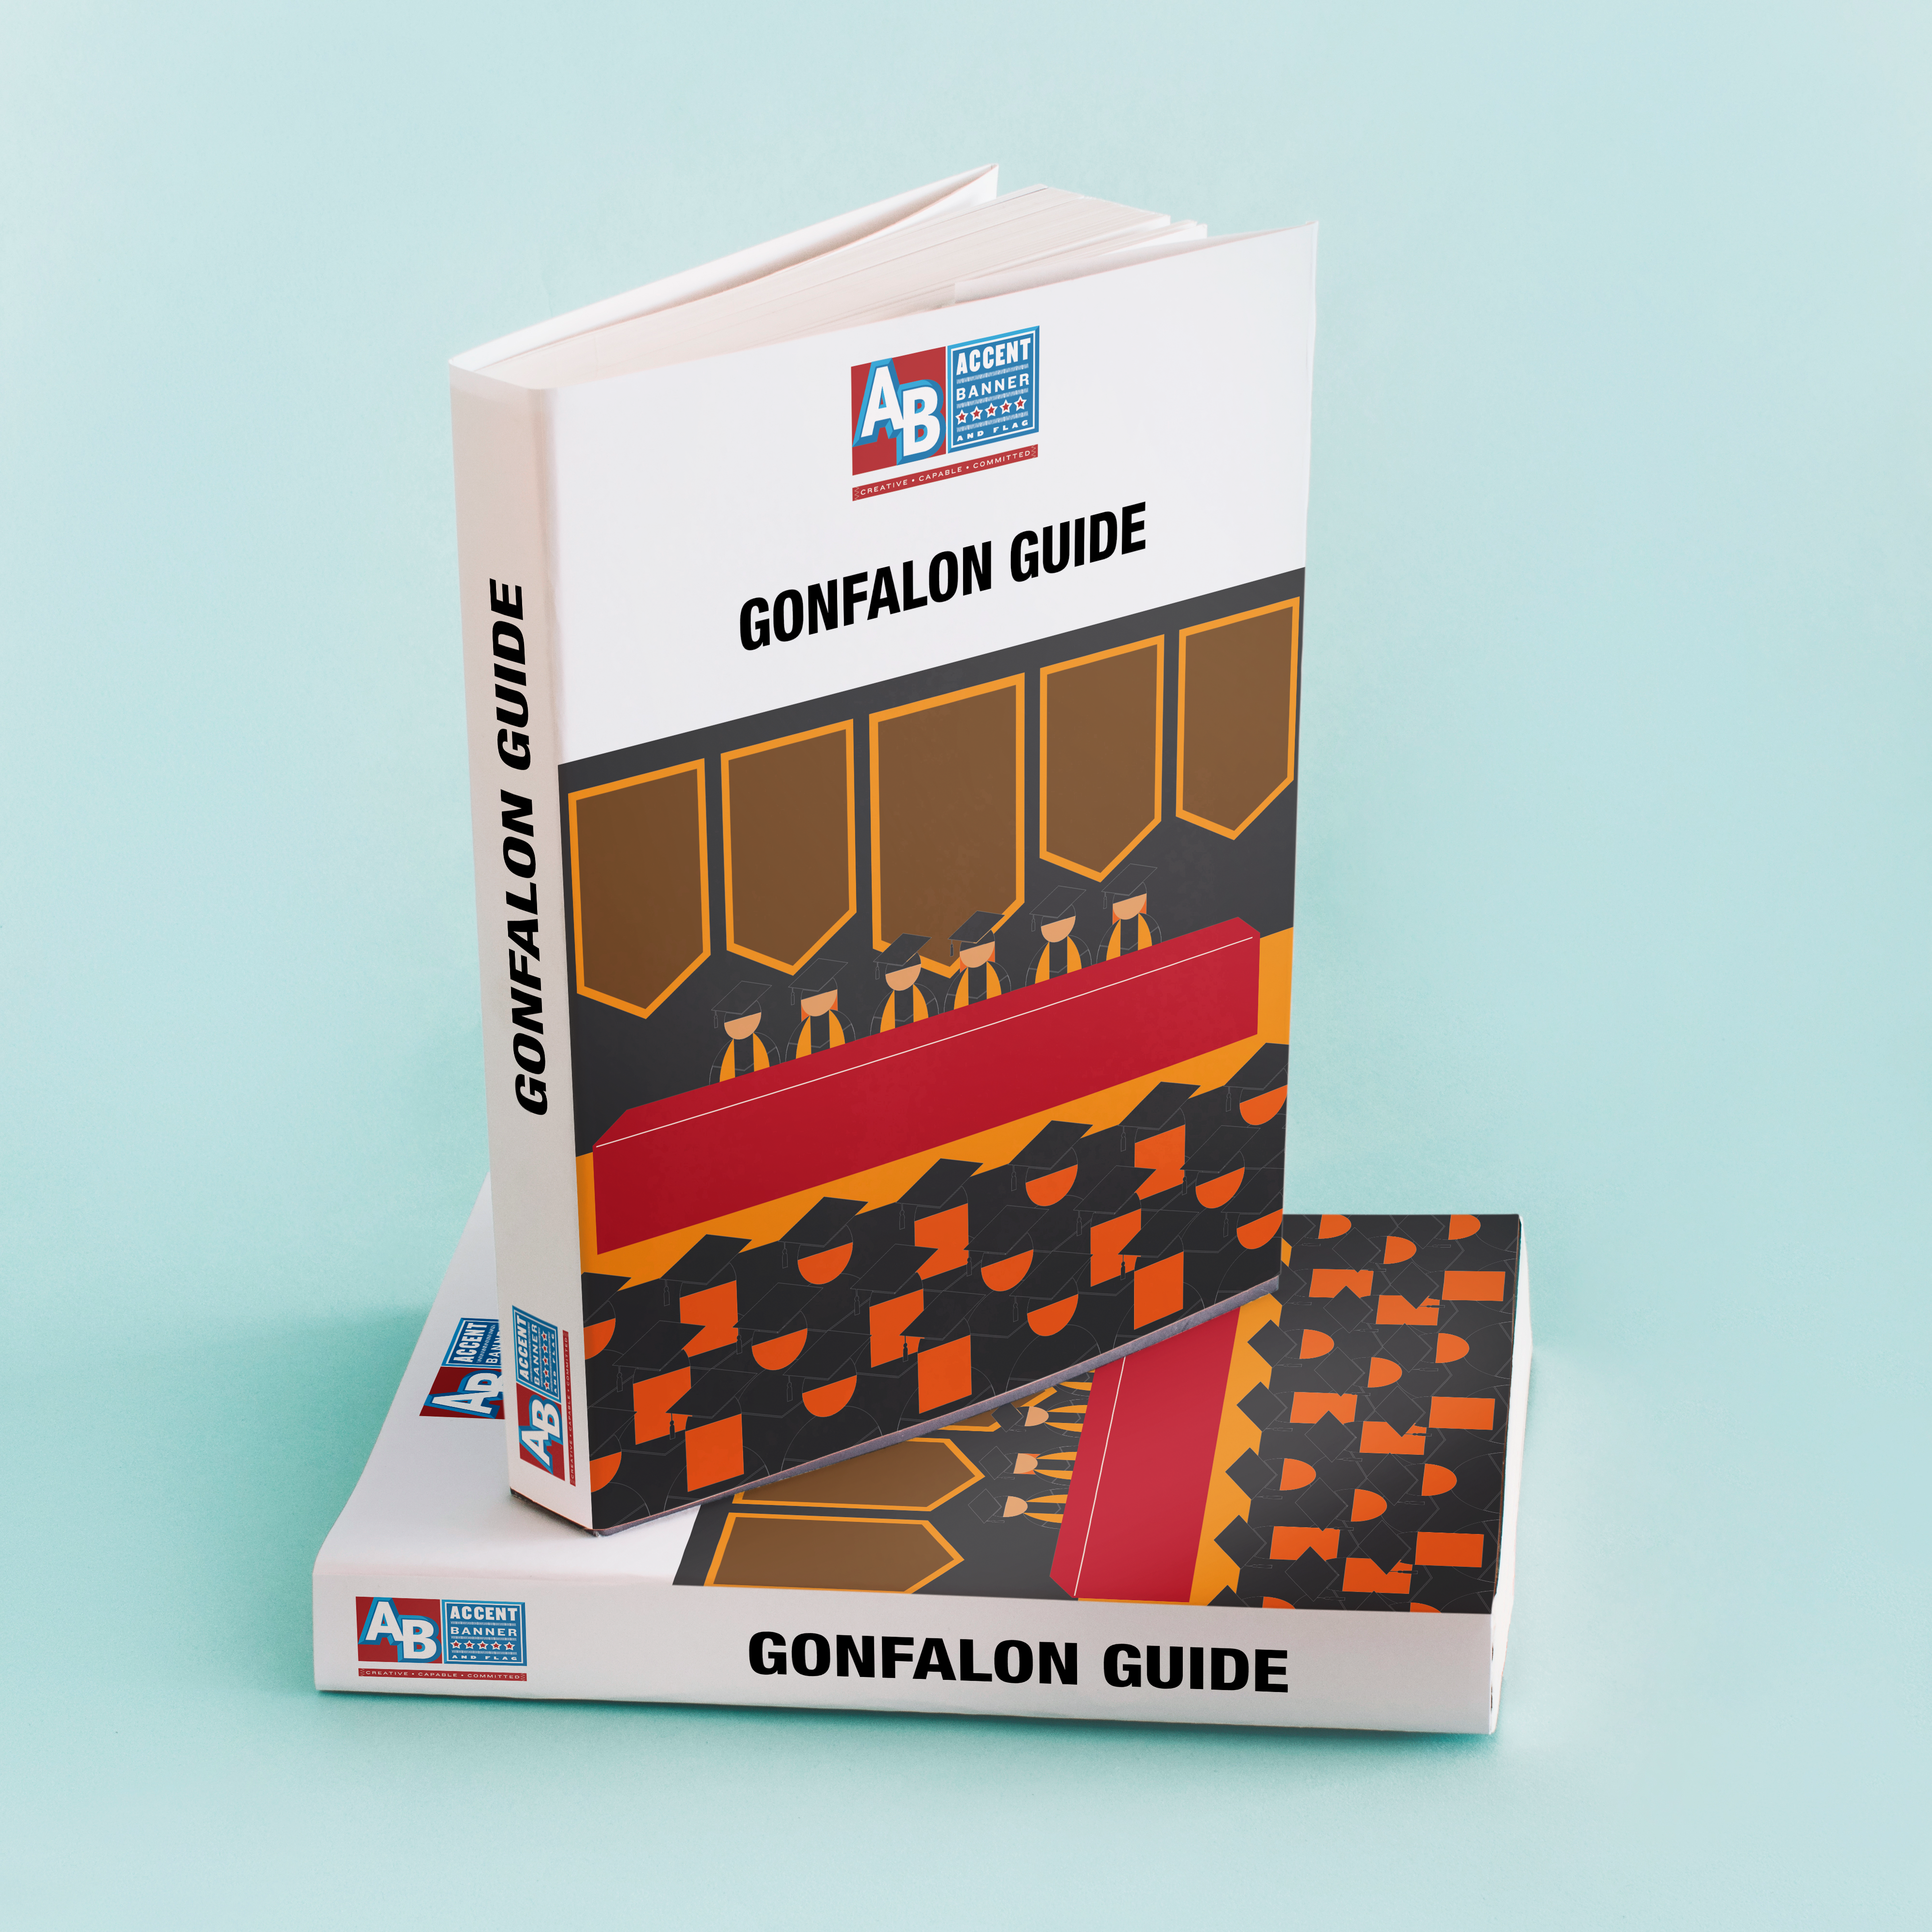 Download your free Gonfalon Guide!